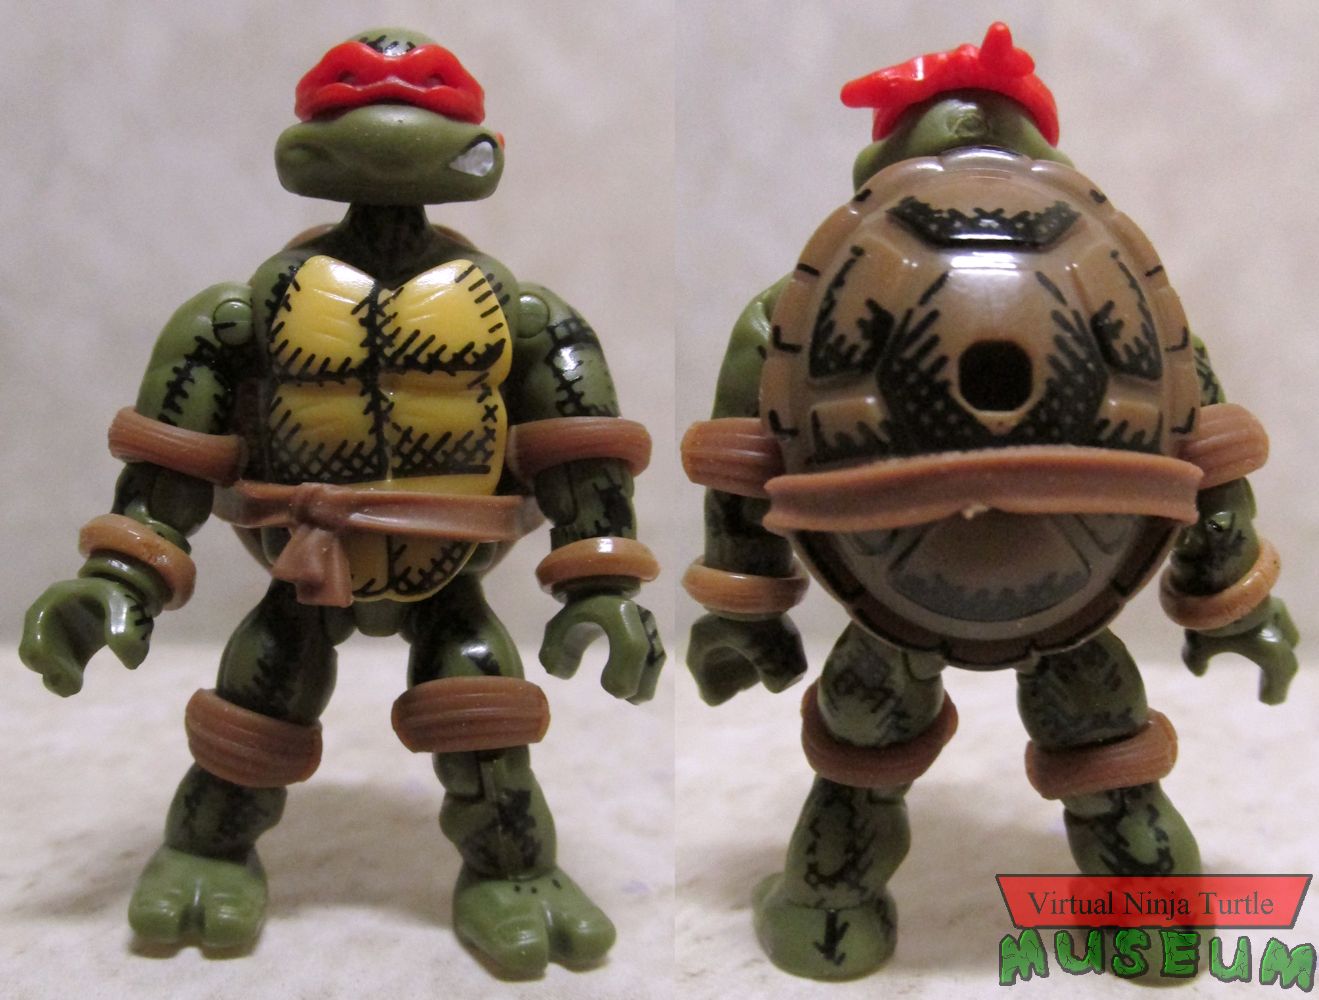 Heroes Series 3 Leonardo front and back